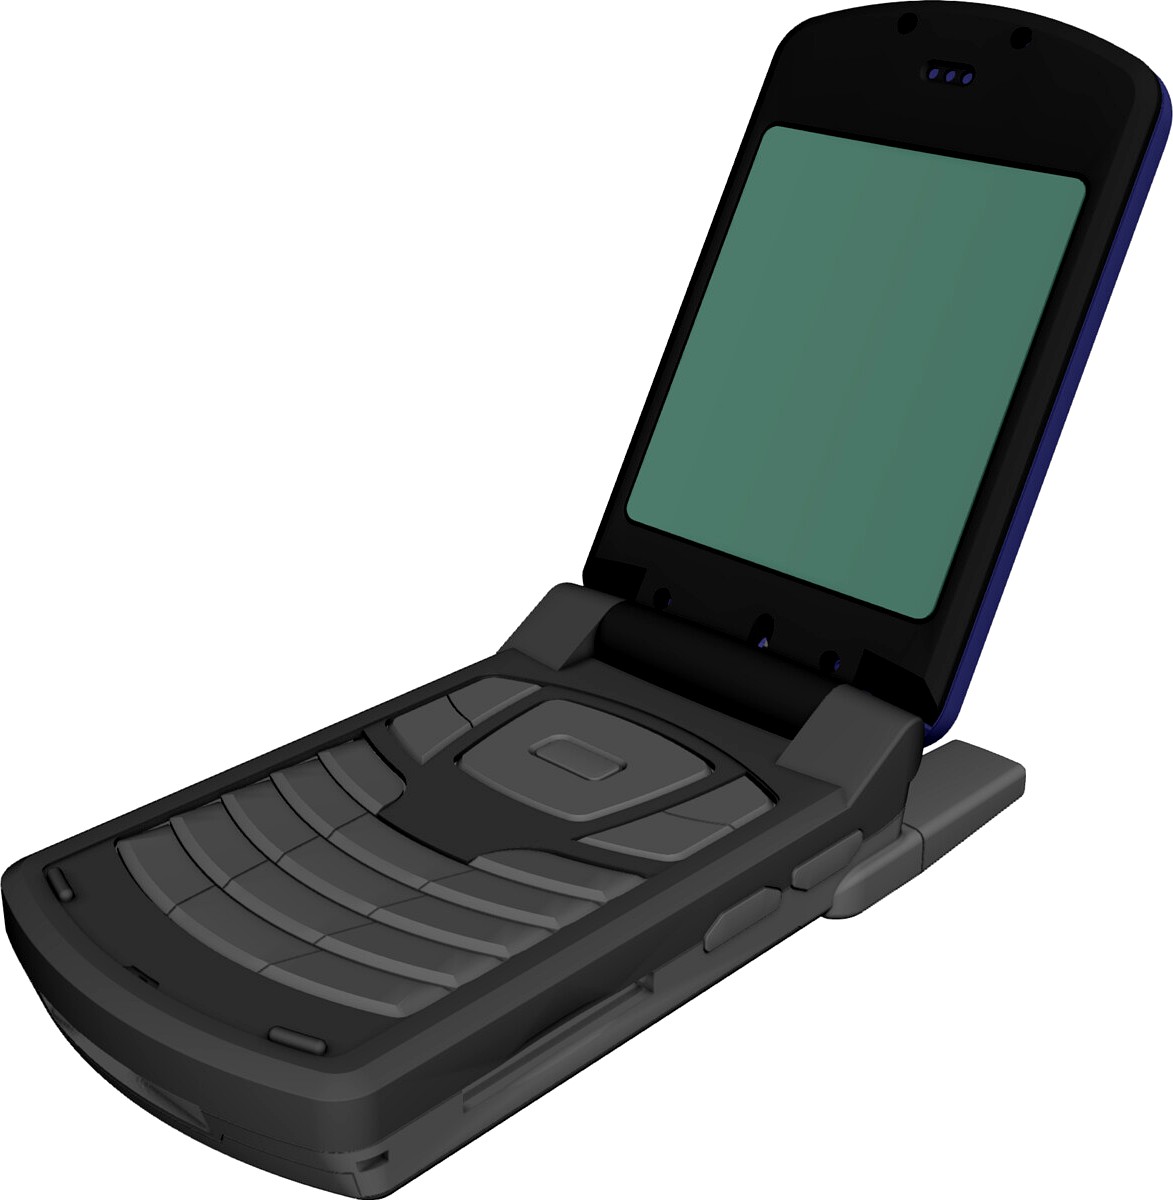 Samsung Cell Phone 3D CAD Model